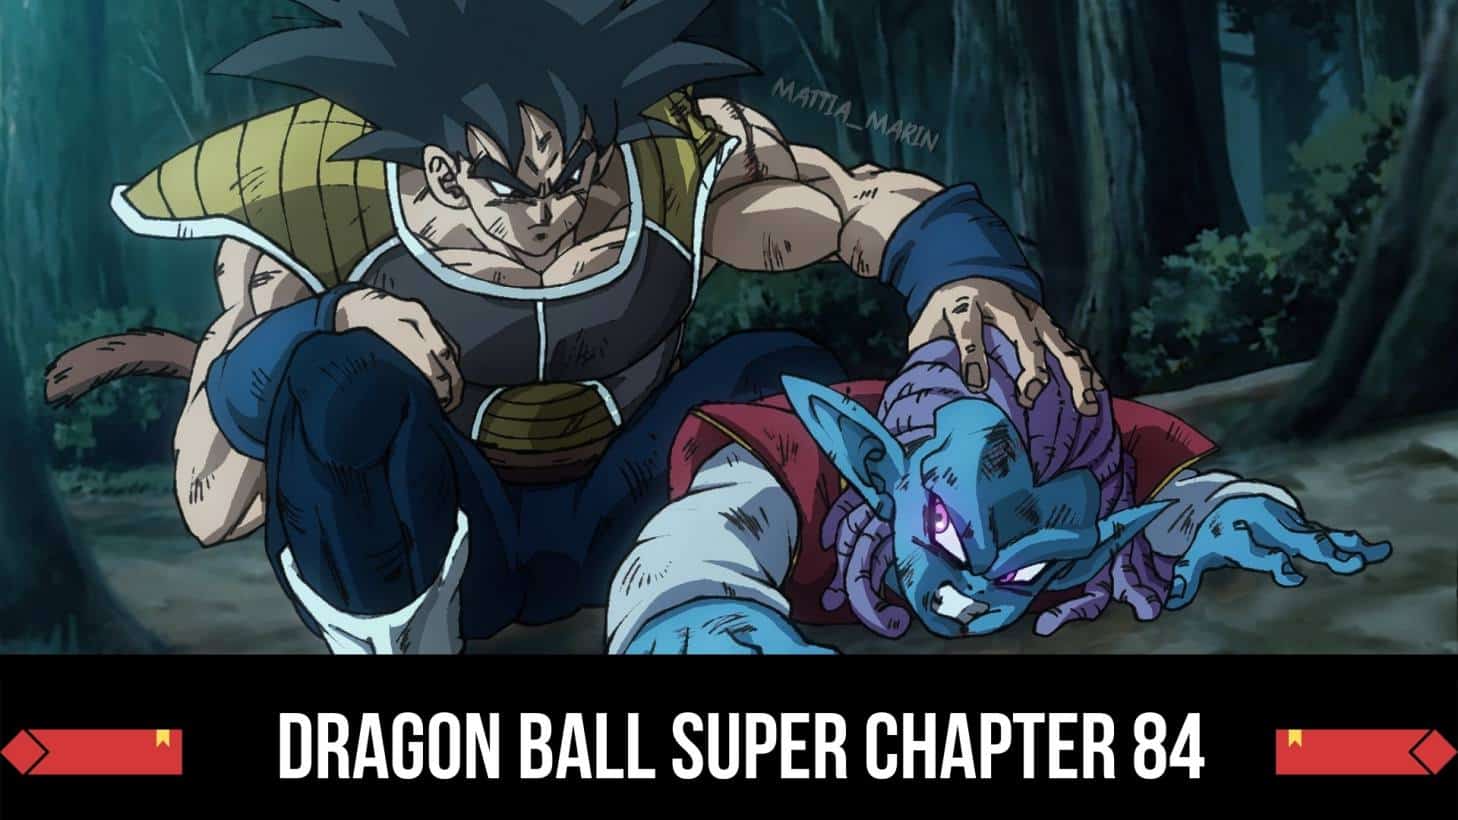 dragon ball super chapter 84 release date